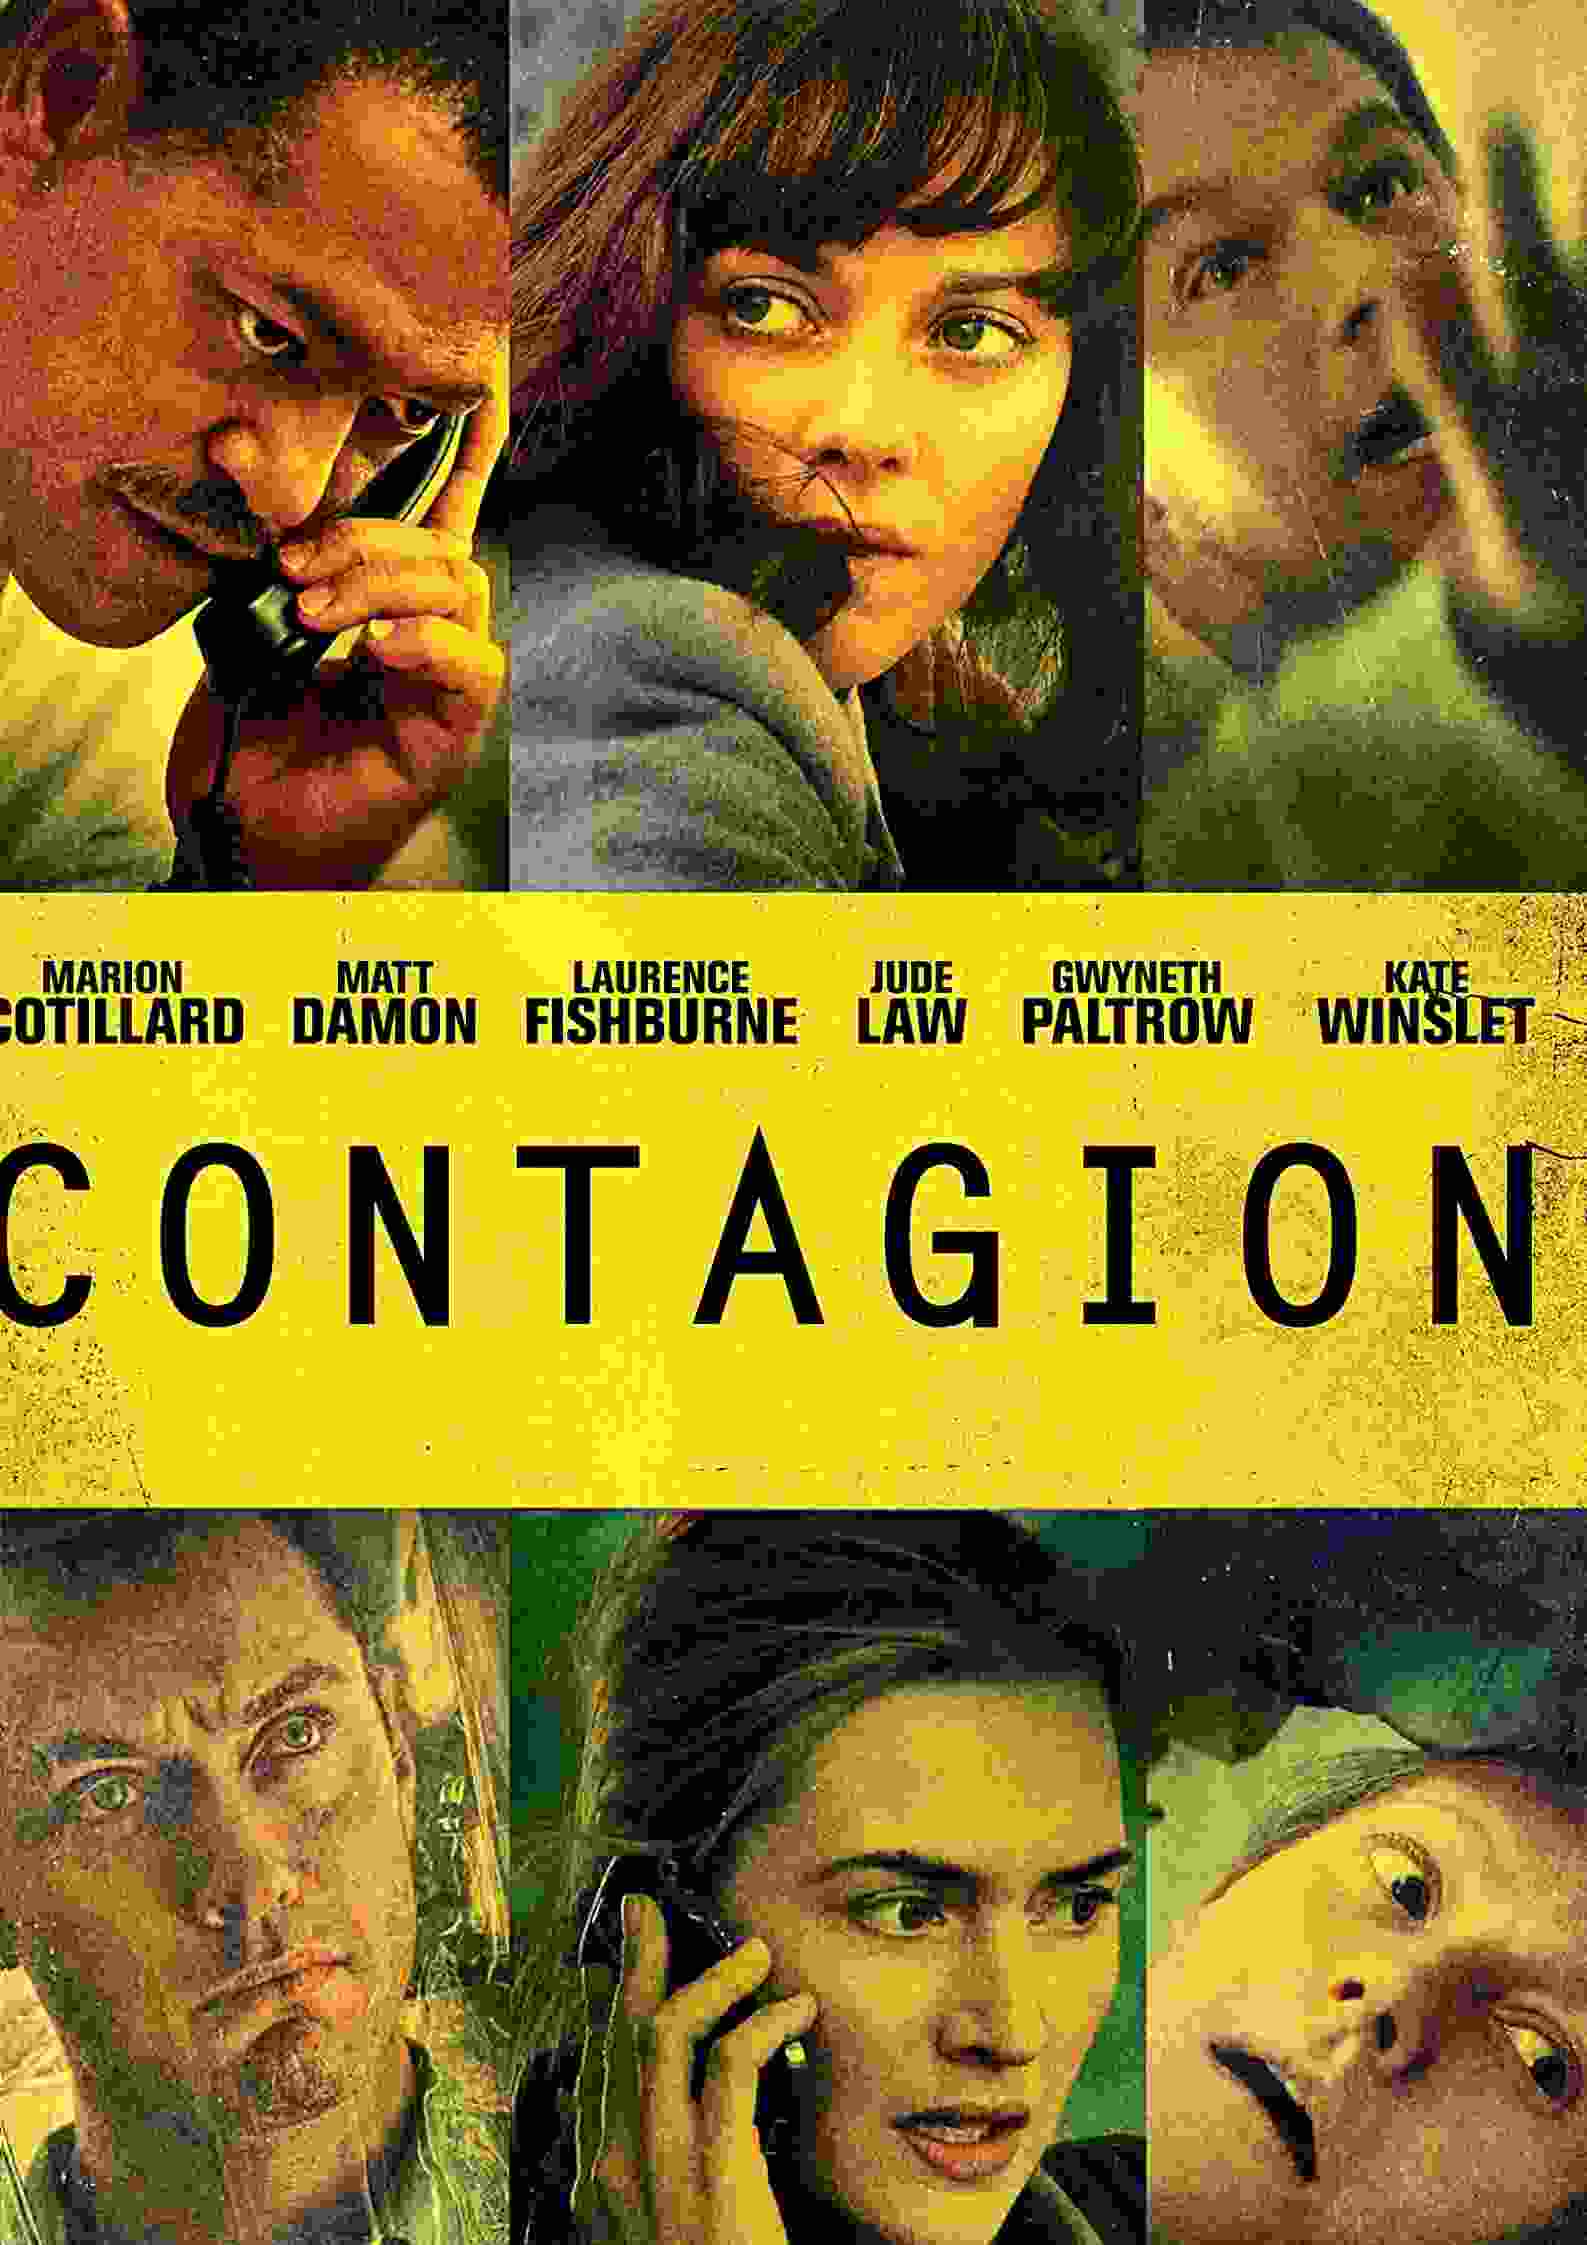 Contagion Parents Guide And Age Rating | 2011